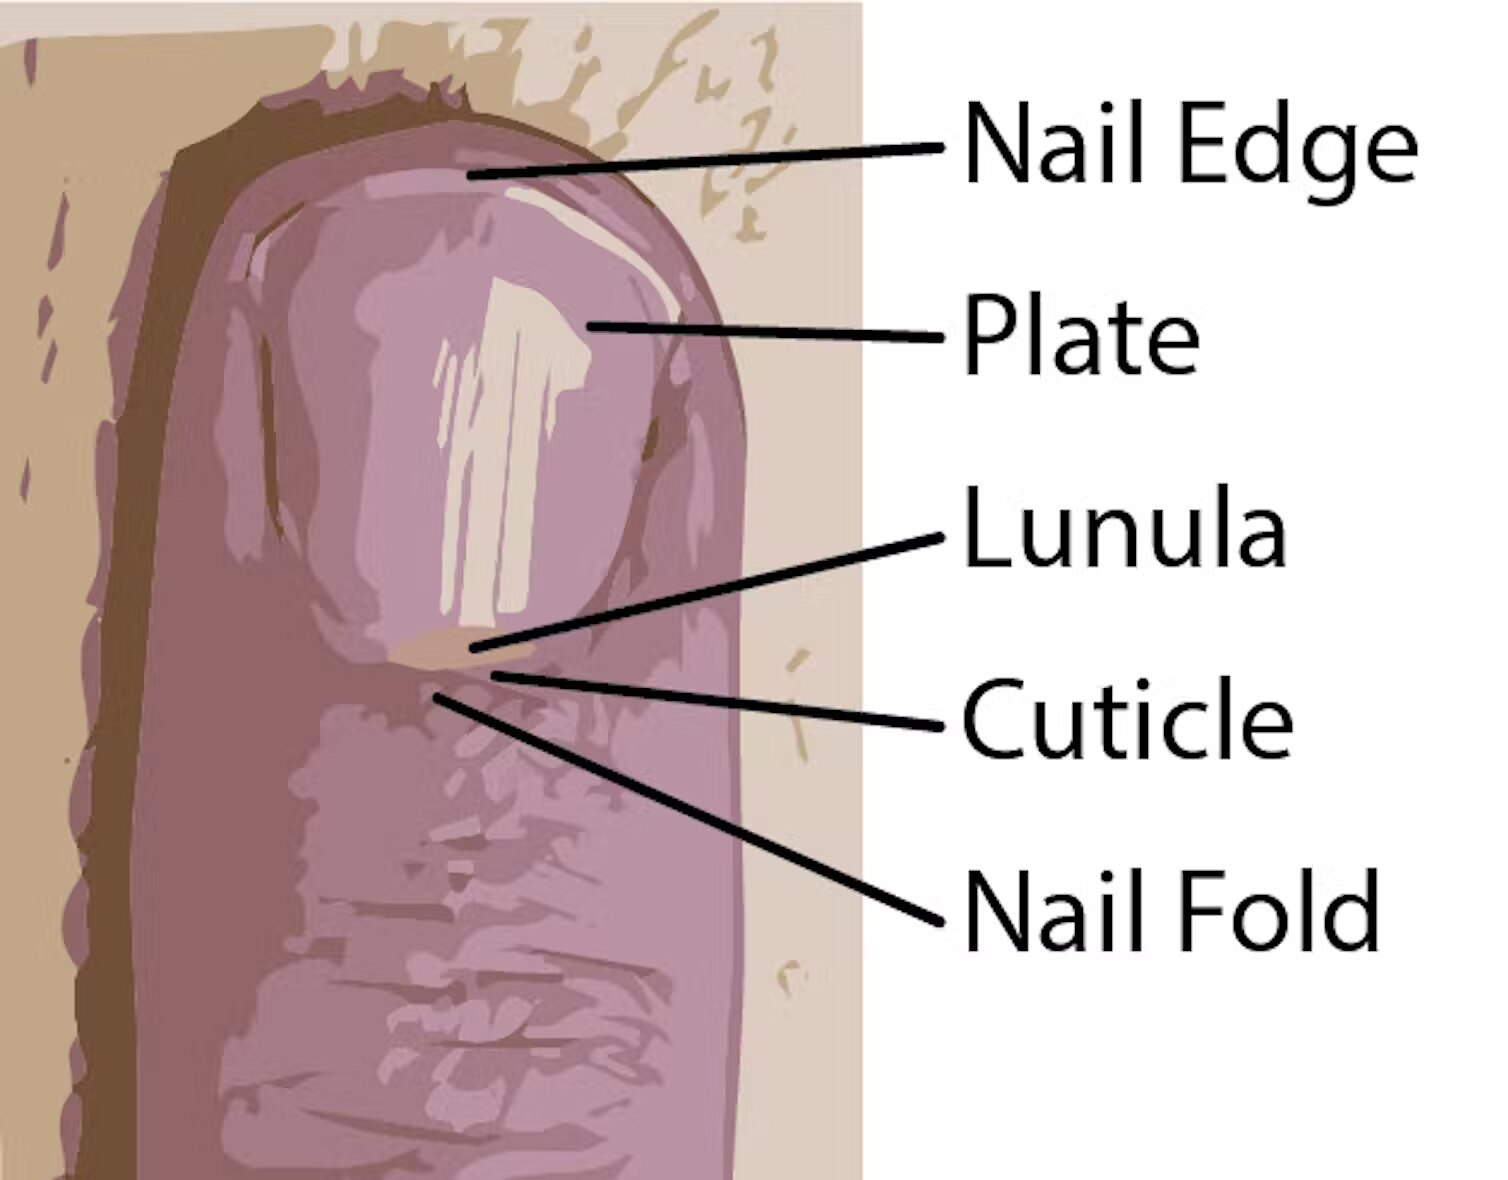 An illustration of a finger tip with labels pointing to the nail edge, plate, lunula, cuticle and nail fold